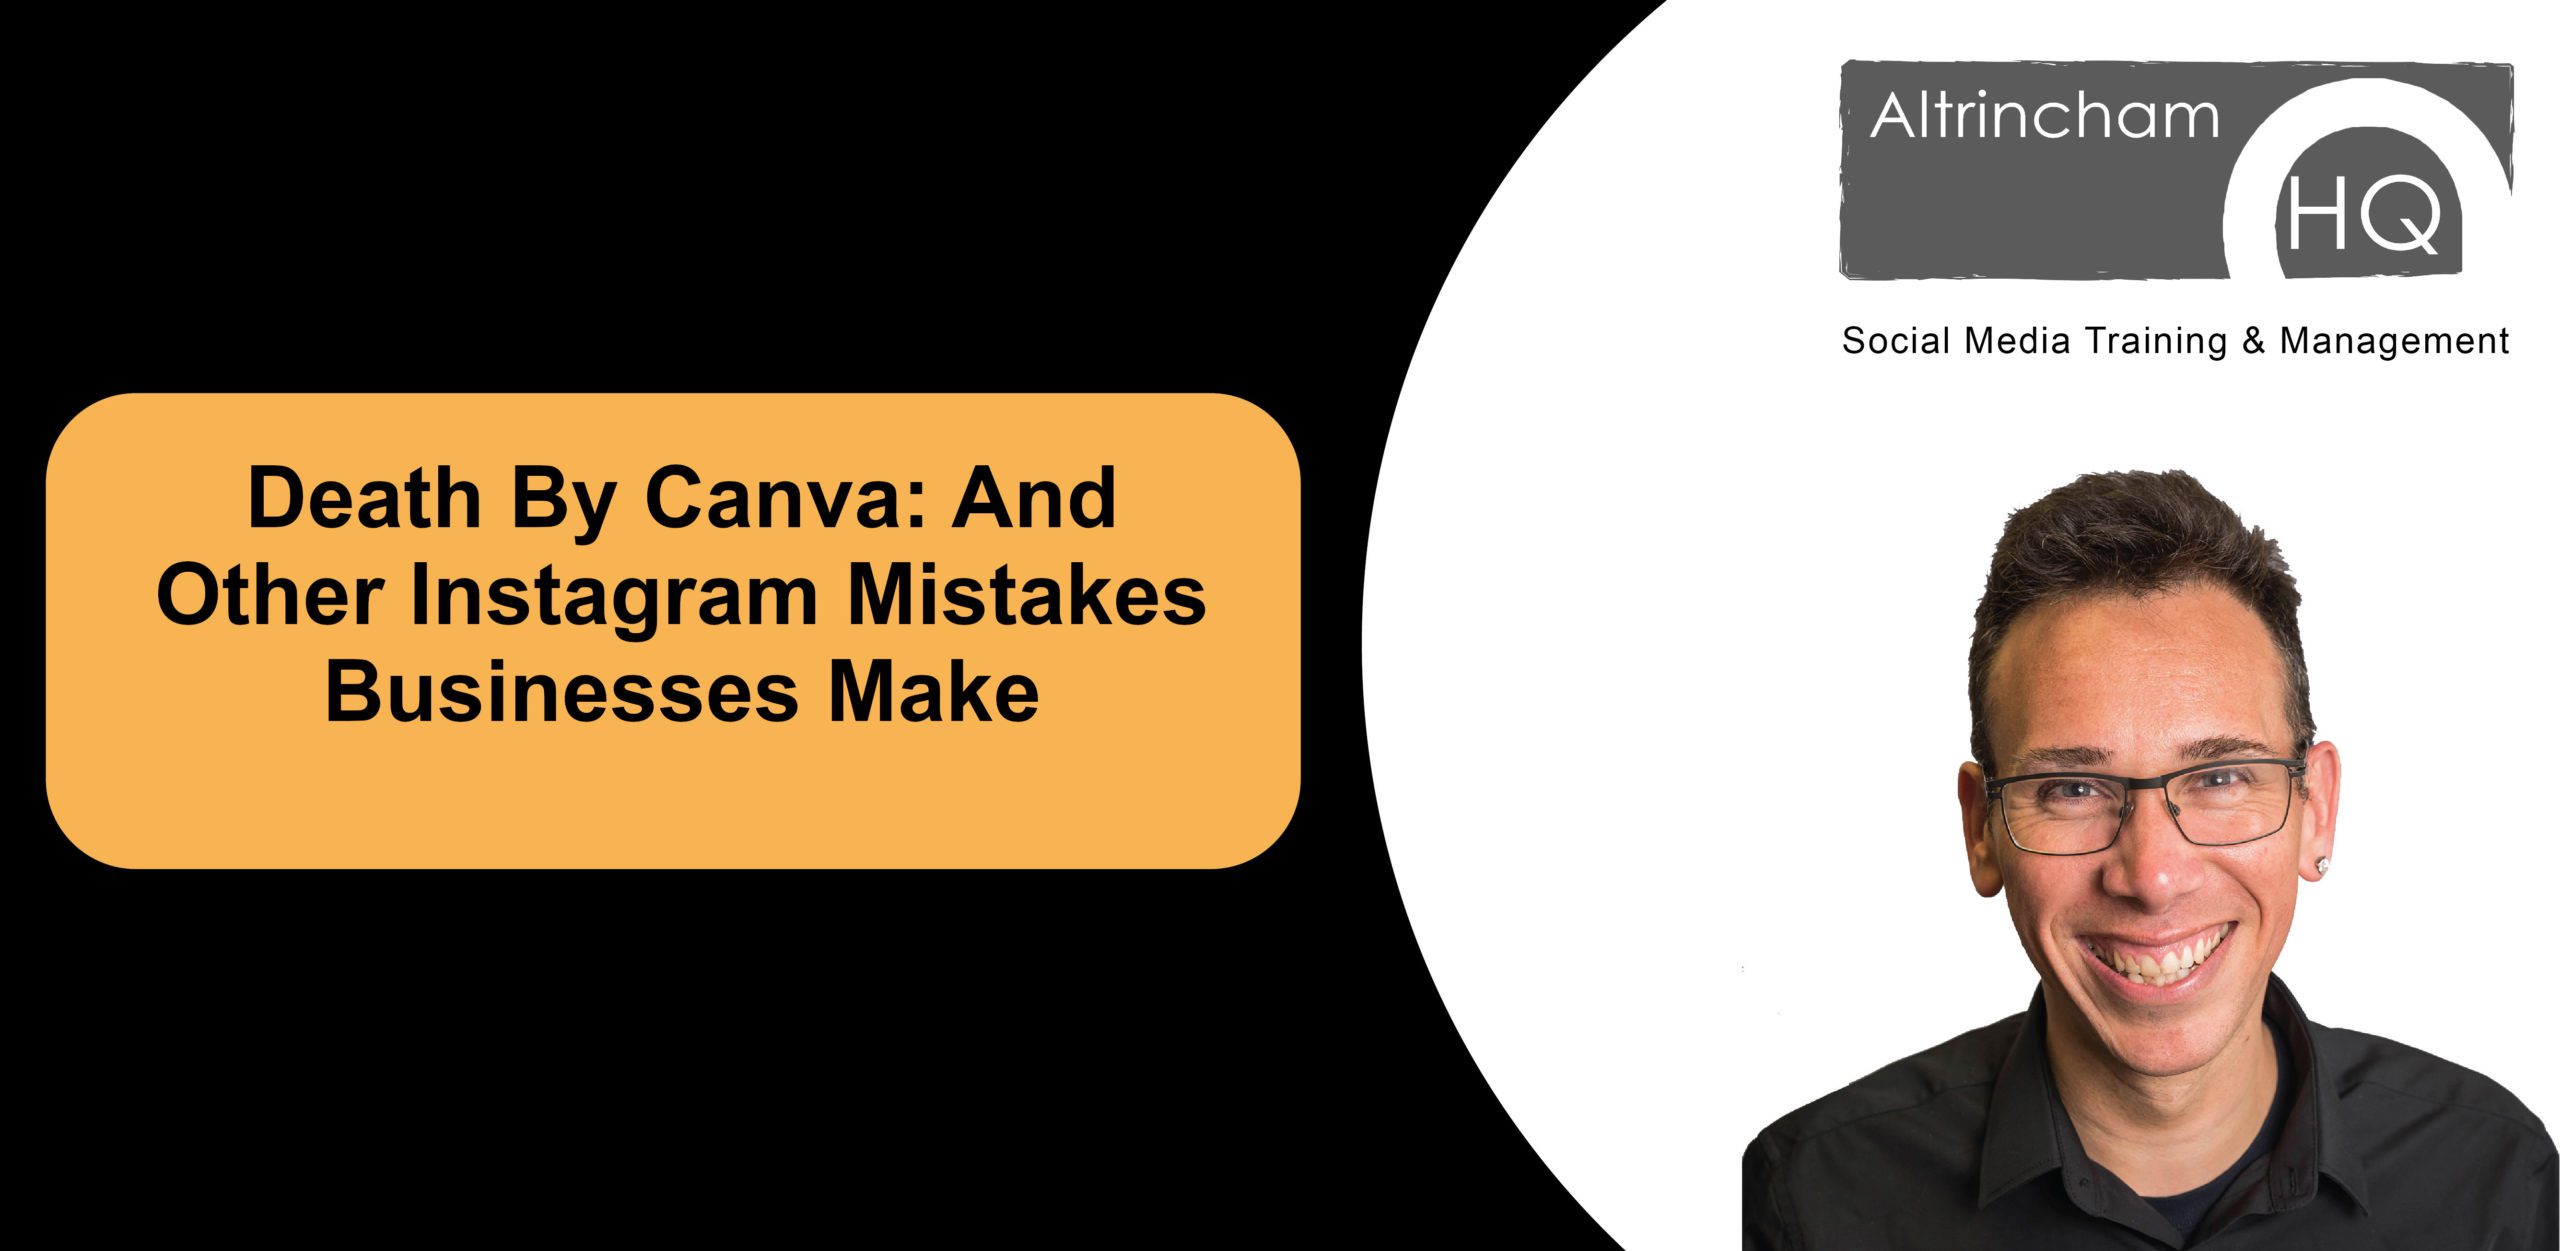 Death By Canva: And Other Instagram Mistakes Businesses Make